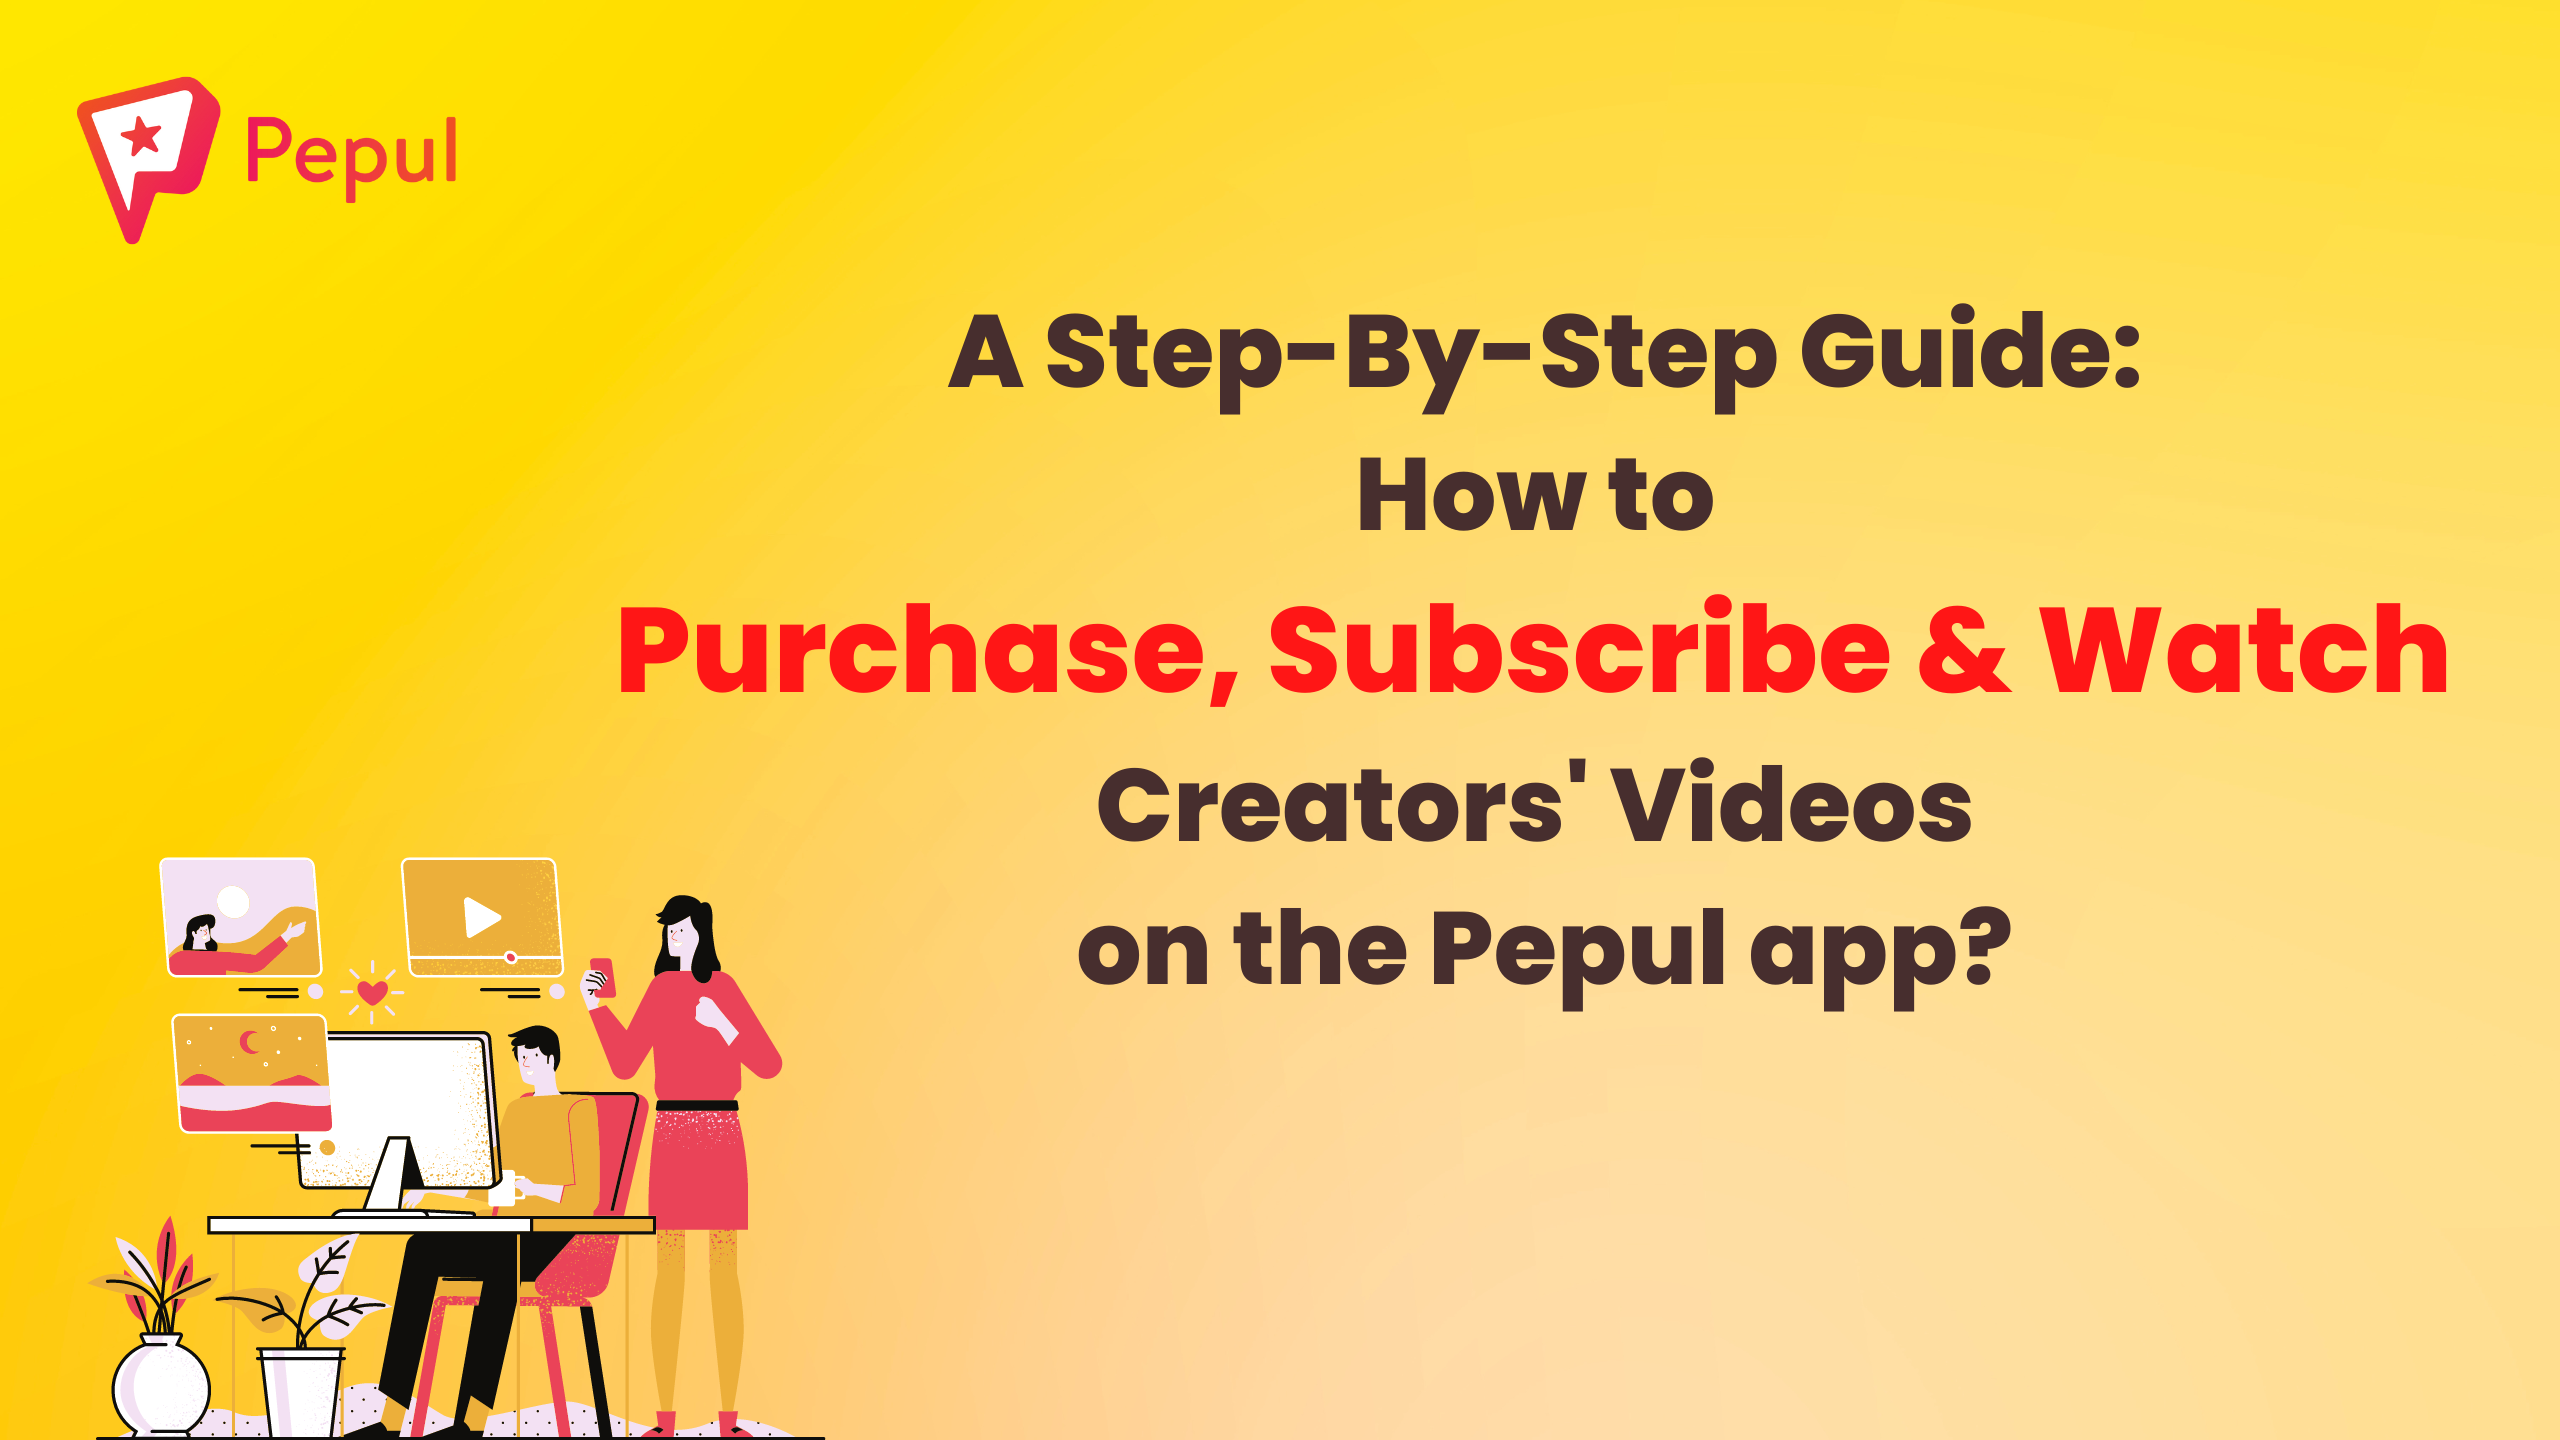 A Step-By-Step Guide: How to Purchase, Subscribe and Watch Creators’ Videos on the Pepul app?